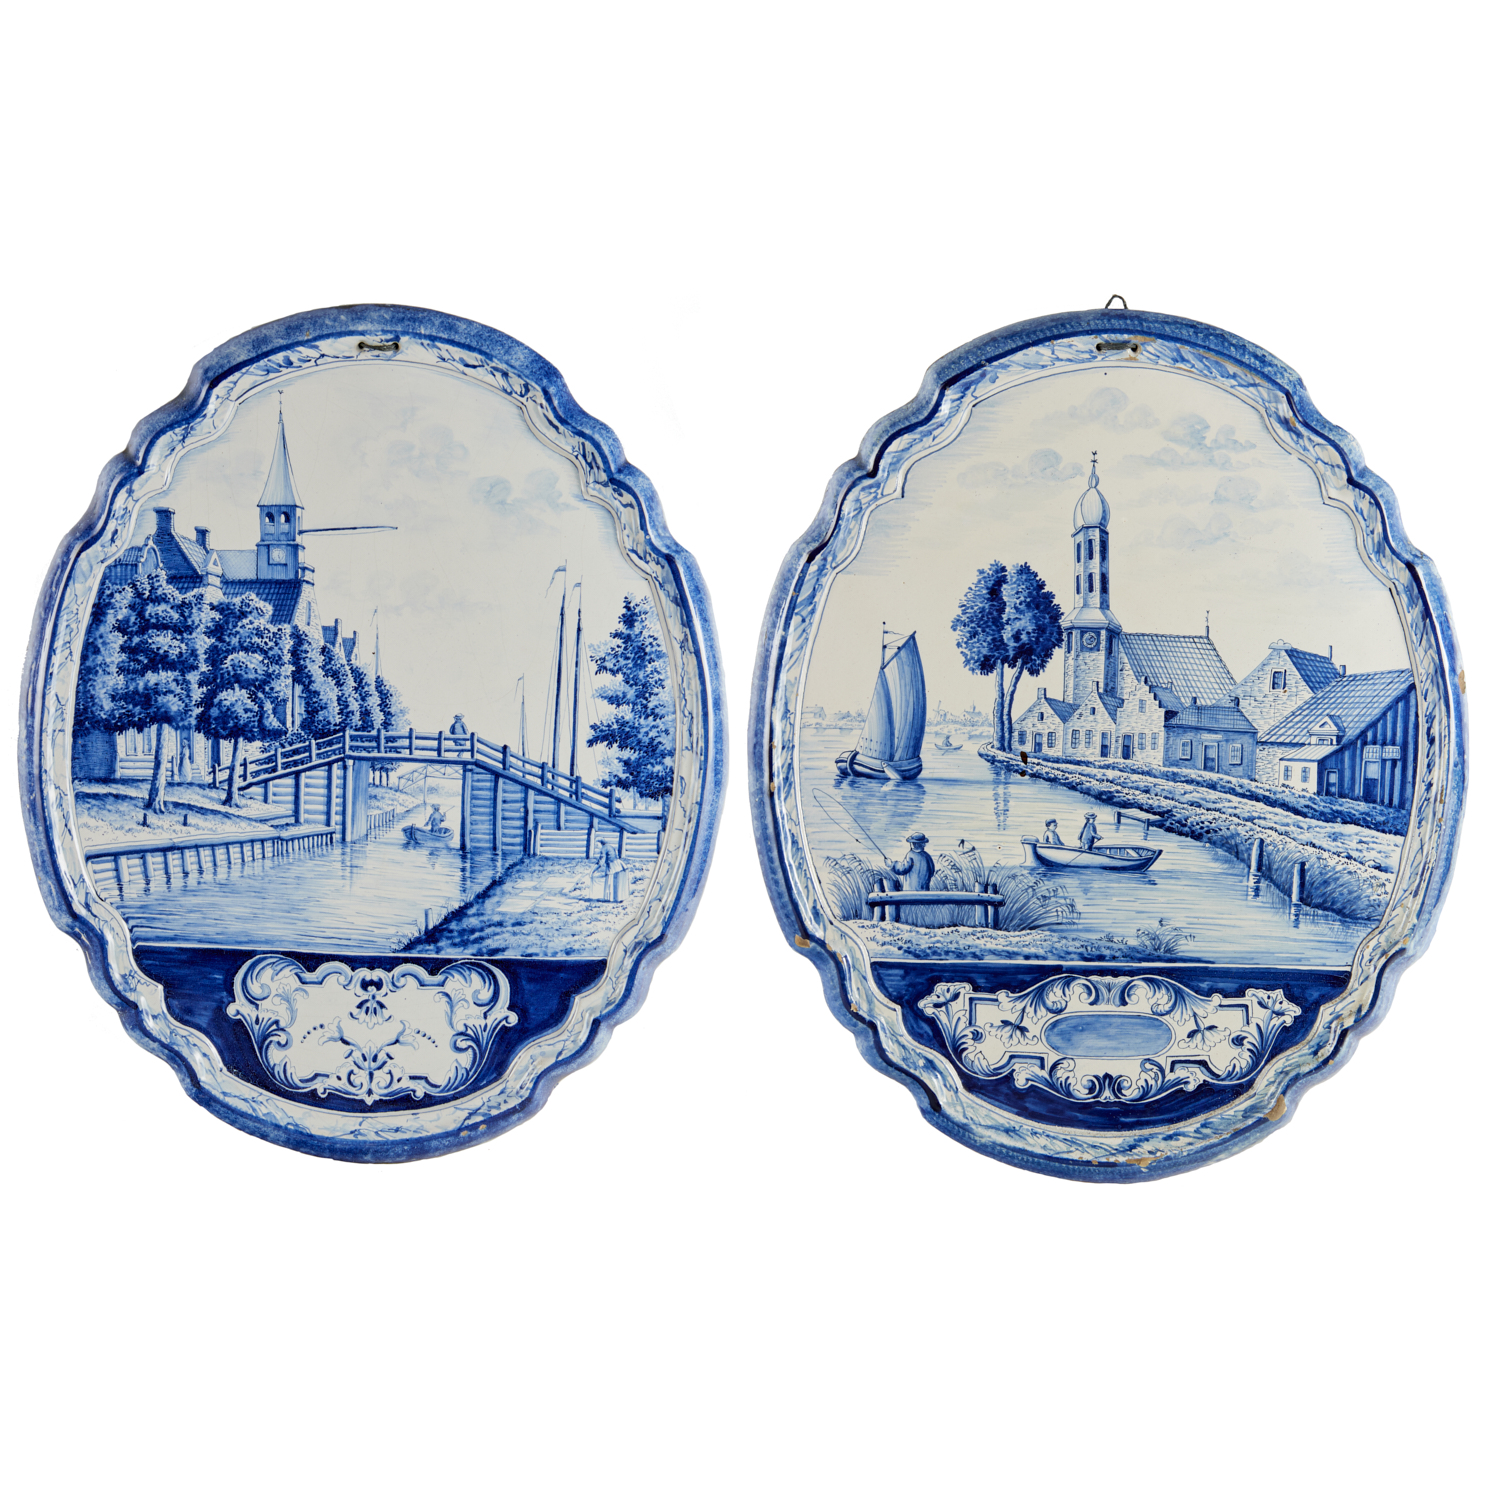 PAIR LARGE DELFT BLUE AND WHITE